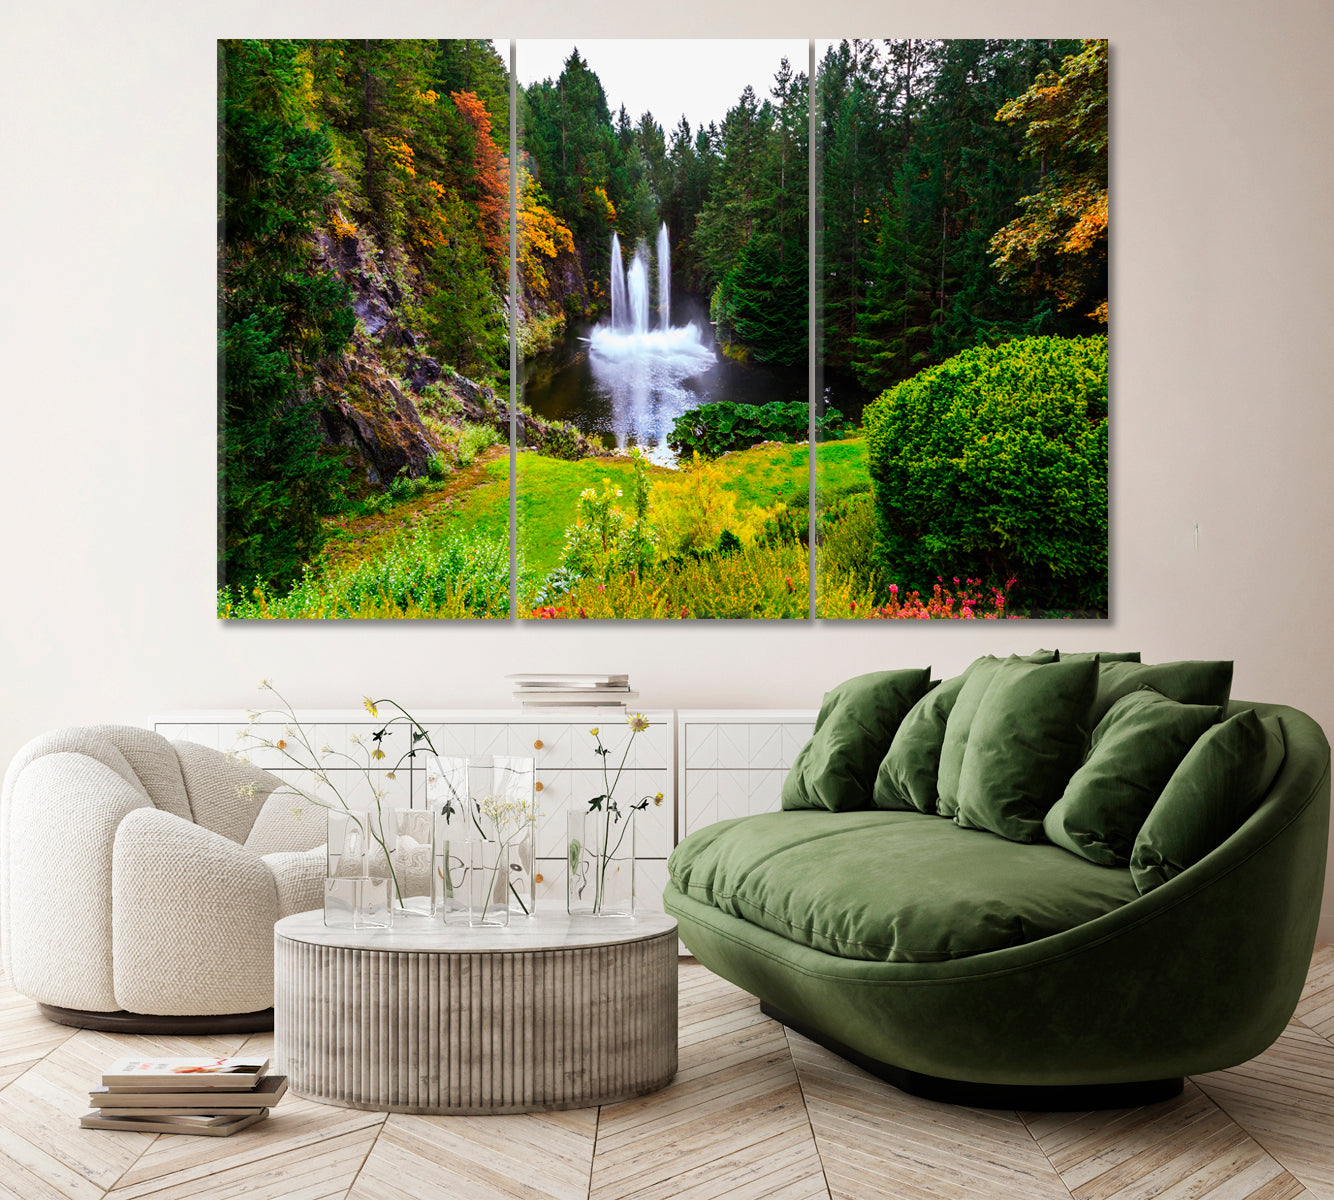 Butchart Gardens on Vancouver Island Canada Canvas Print ArtLexy 3 Panels 36"x24" inches 